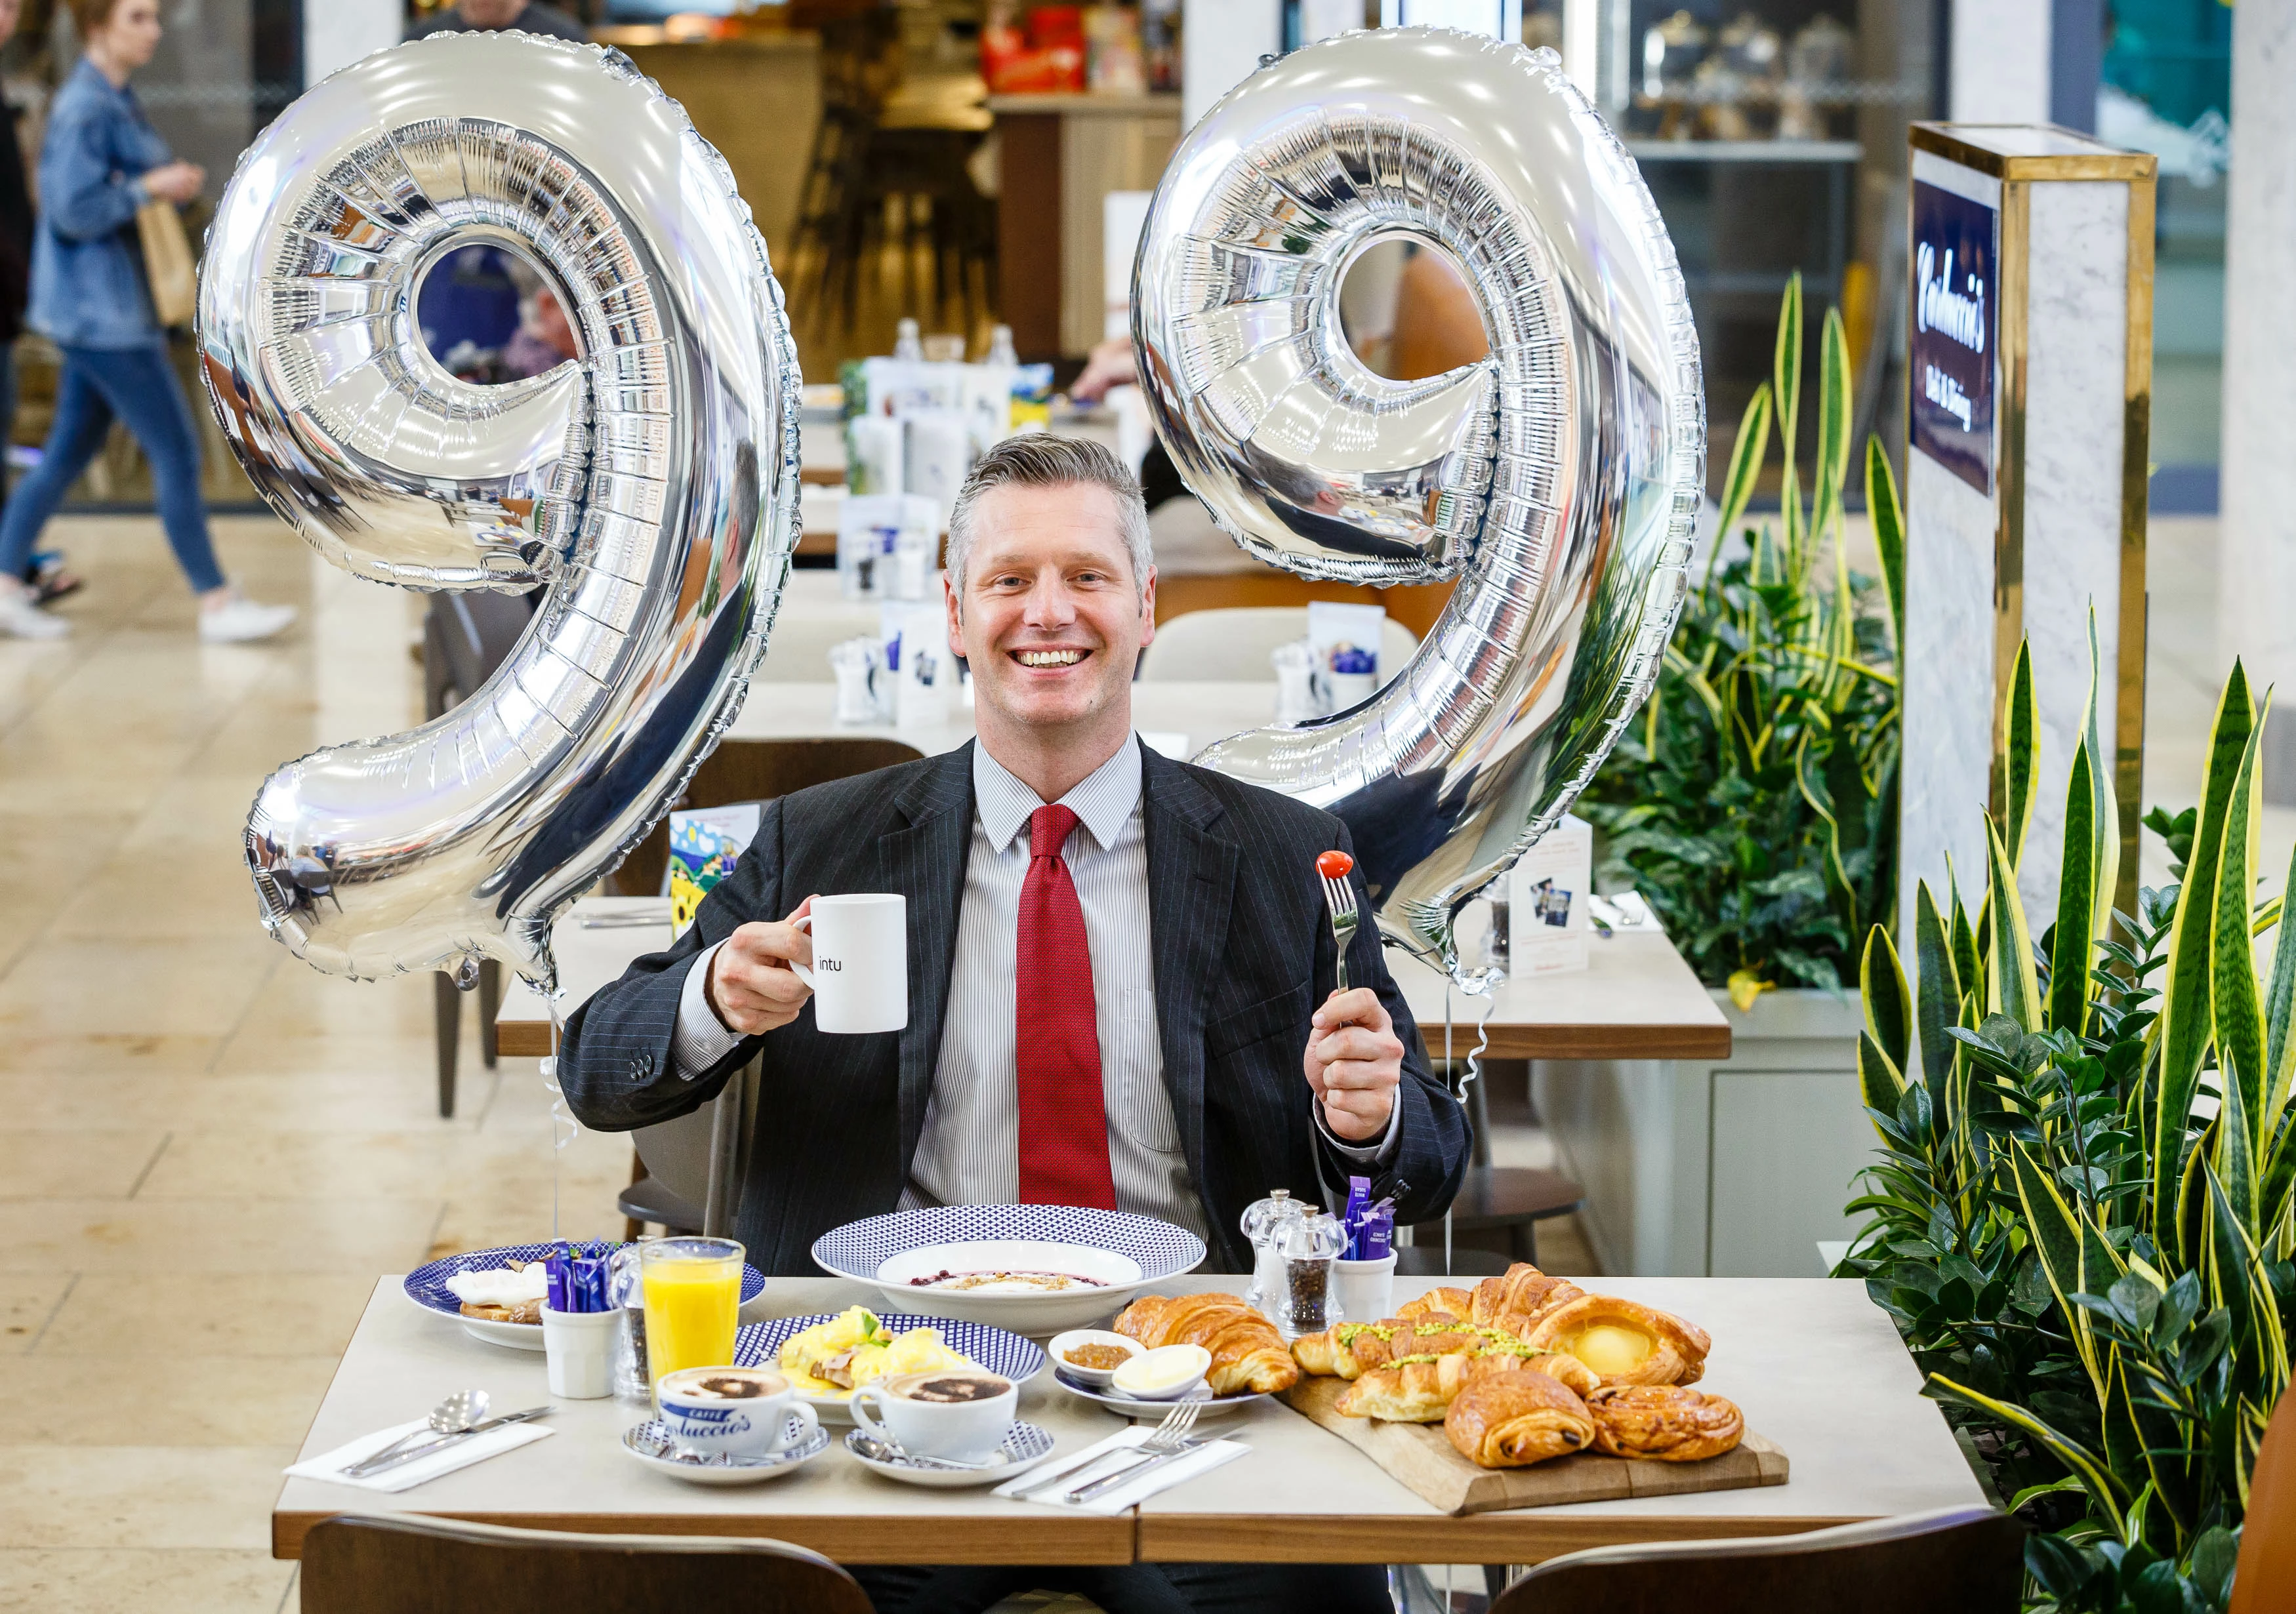 intu Metrocentre's general manager Gavin Prior enjoys an early breakfast at Carluccio's